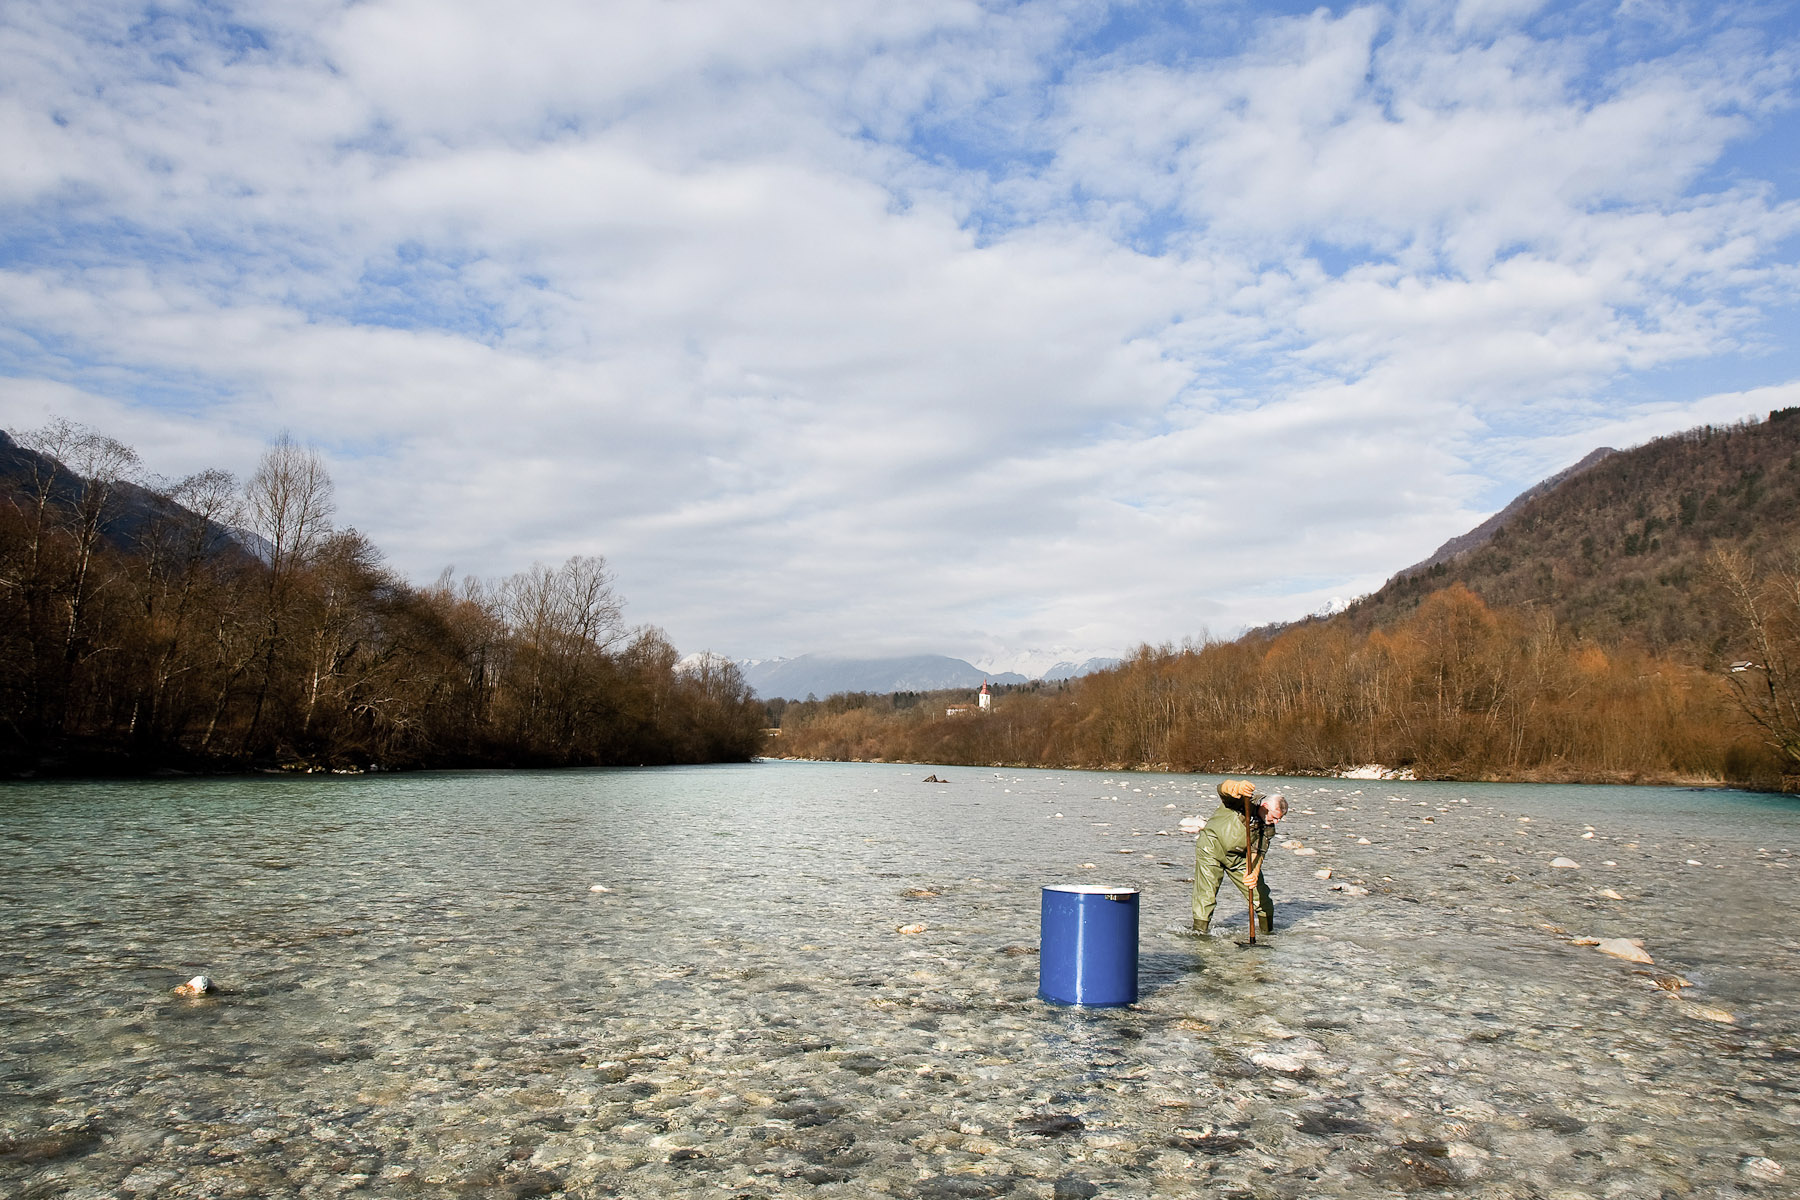 Fishkeeper Zoran Kocič digs a nest in the middle of Soca river to insert eyed eggs. Only hybrids prevail in Soca, but they keep stocking it with pure Marble trout to study the way Marble trout mixes with Brown trout, and to try and raise the level of pure DNA in hybrids.